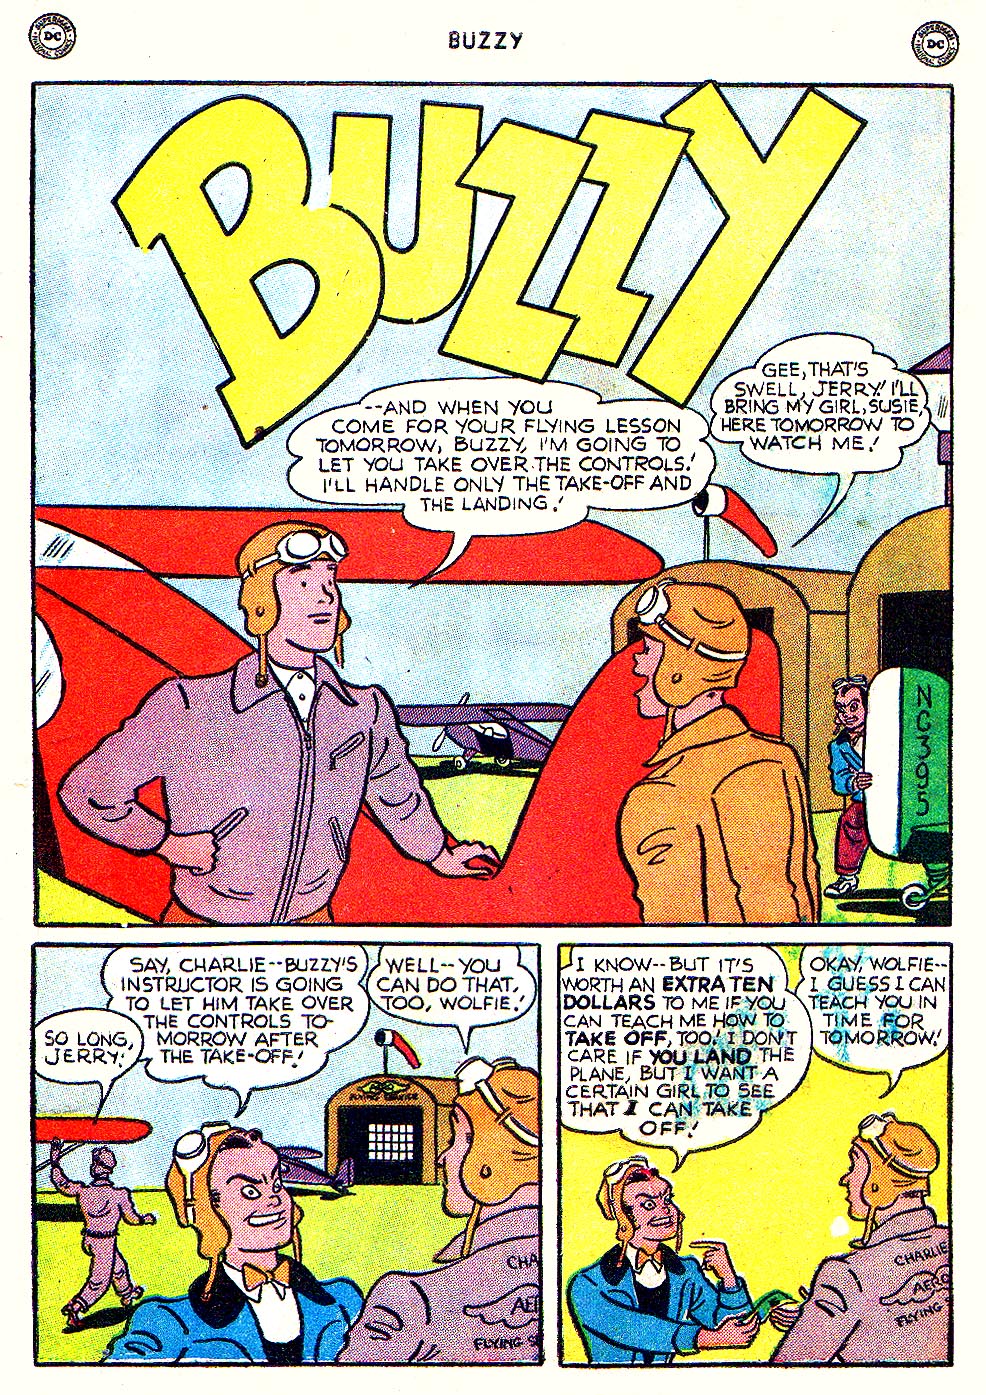 Read online Buzzy comic -  Issue #36 - 3